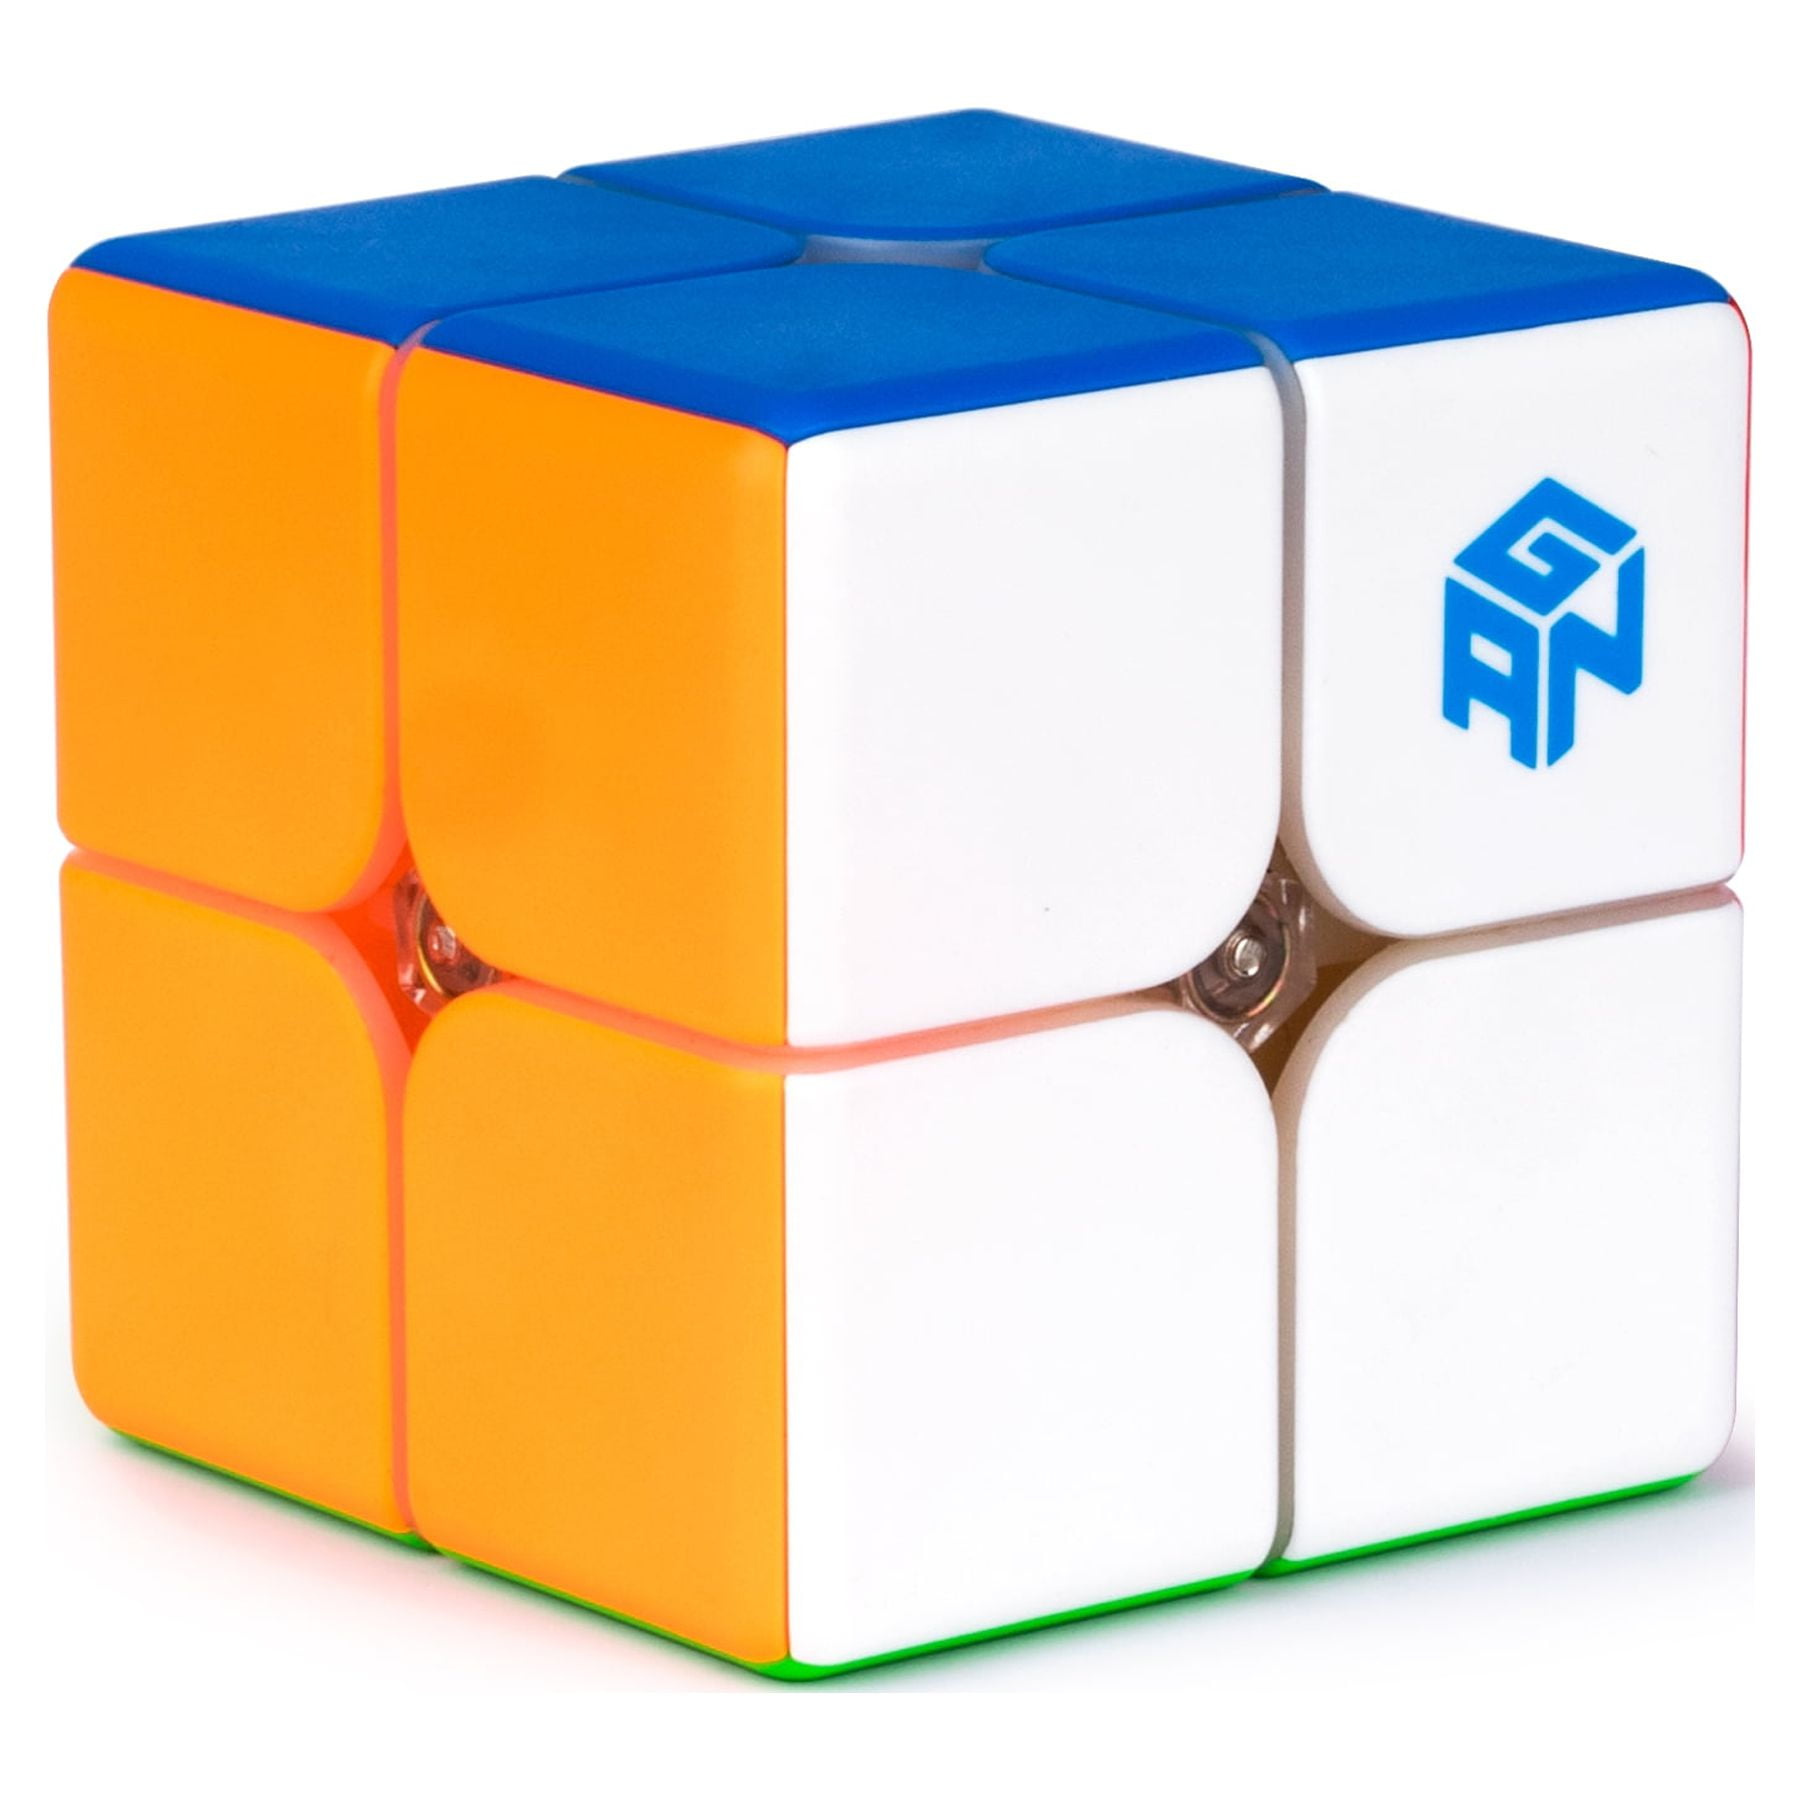 Rubik's 2X2 Cube Puzzle Cube by University Games 